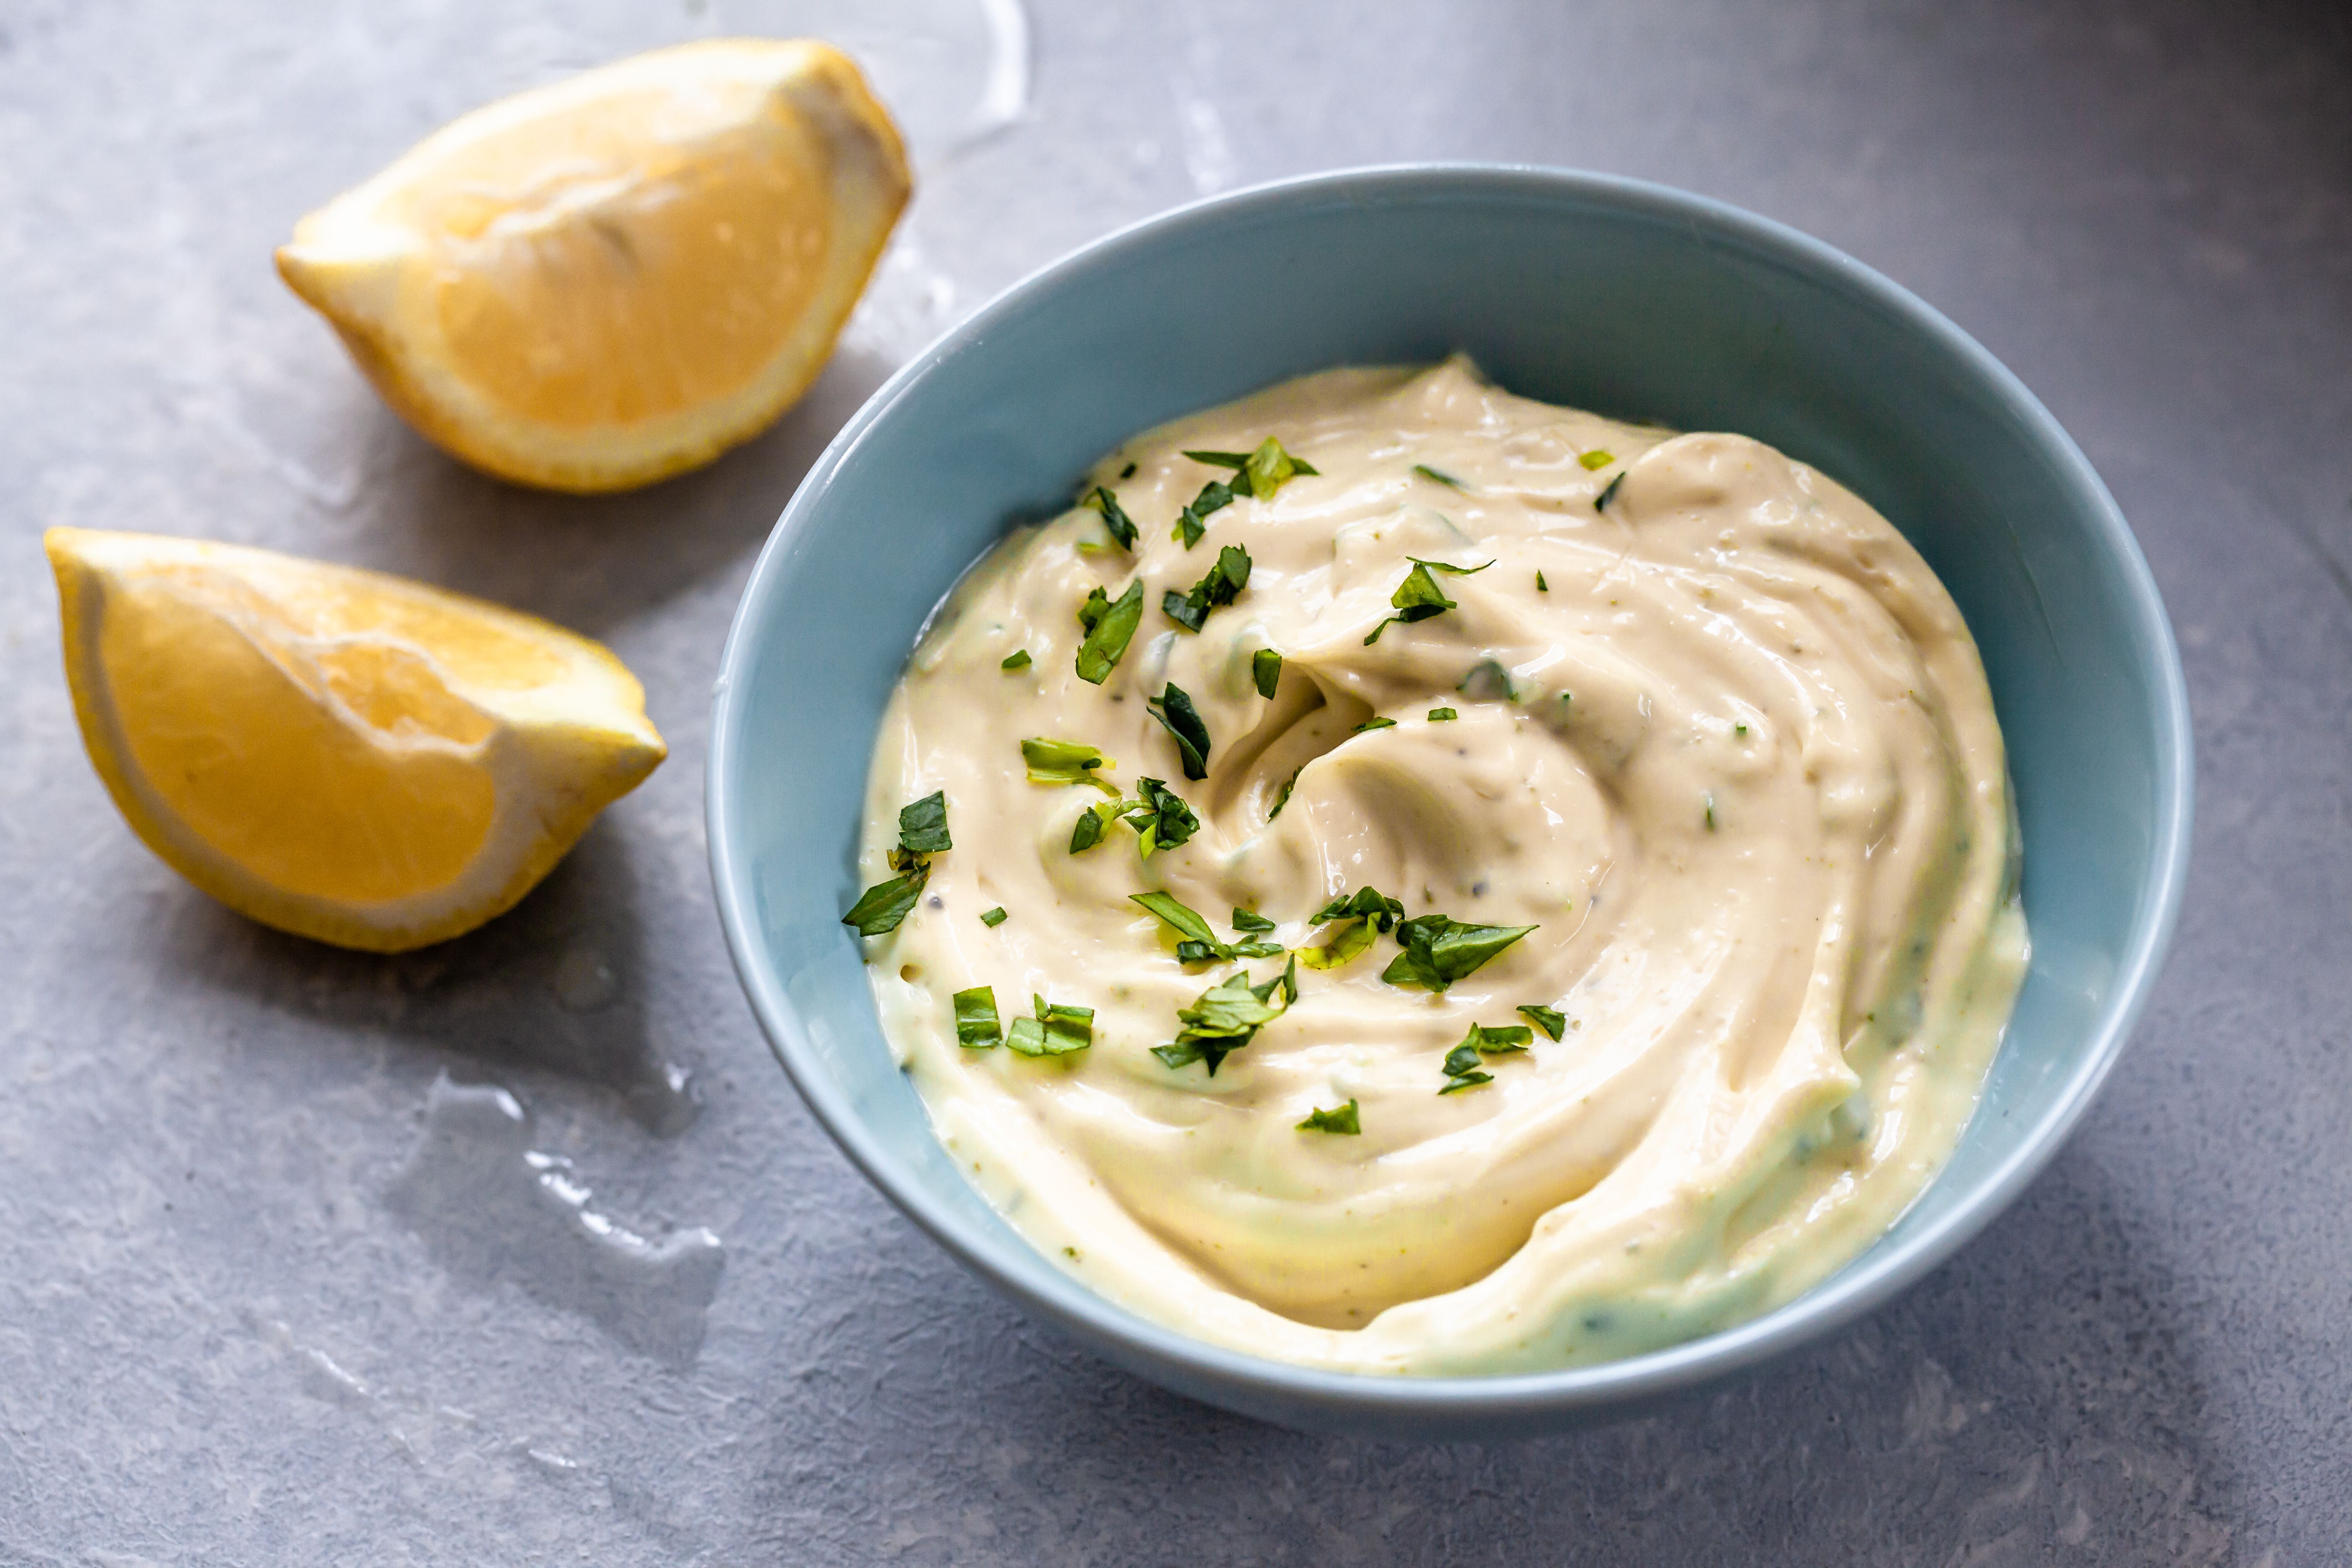 Recipe Homemade Aioli With Lemon And Tarragon Whips Up Quickly In A Blender The Boston Globe,Gaillardia Flower